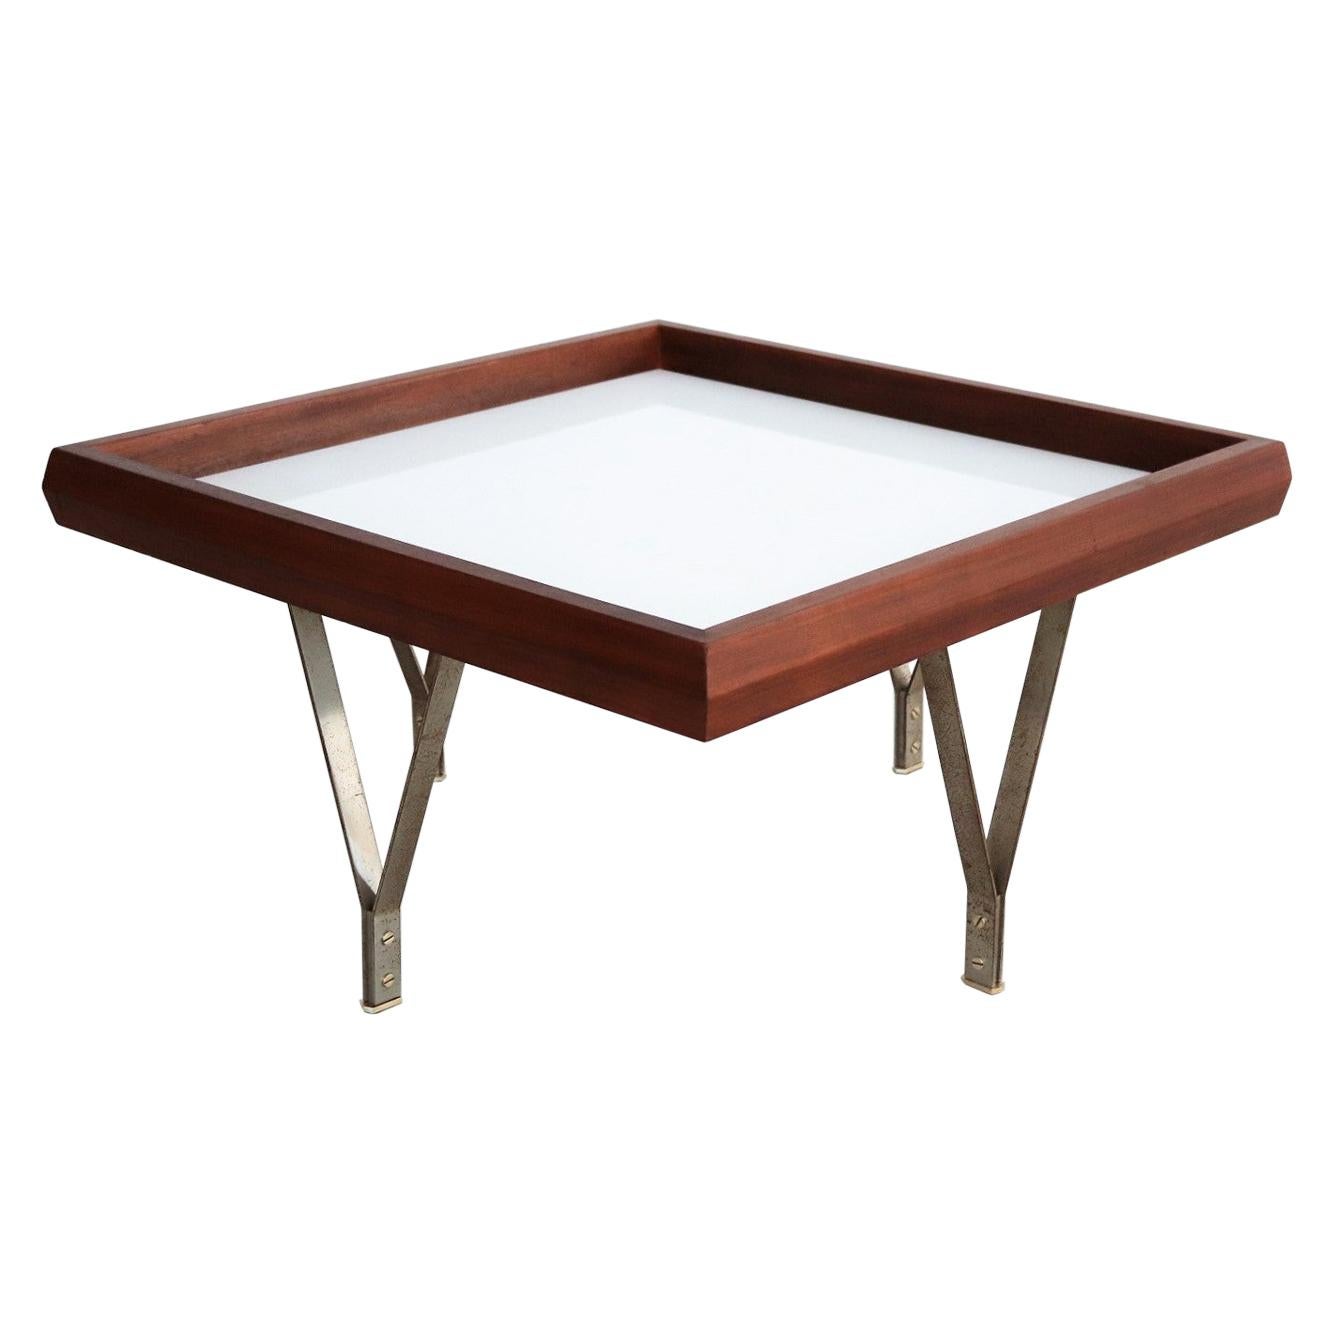 Italian Midcentury Modern Coffee Table in Mahogany and Glass, 1960s